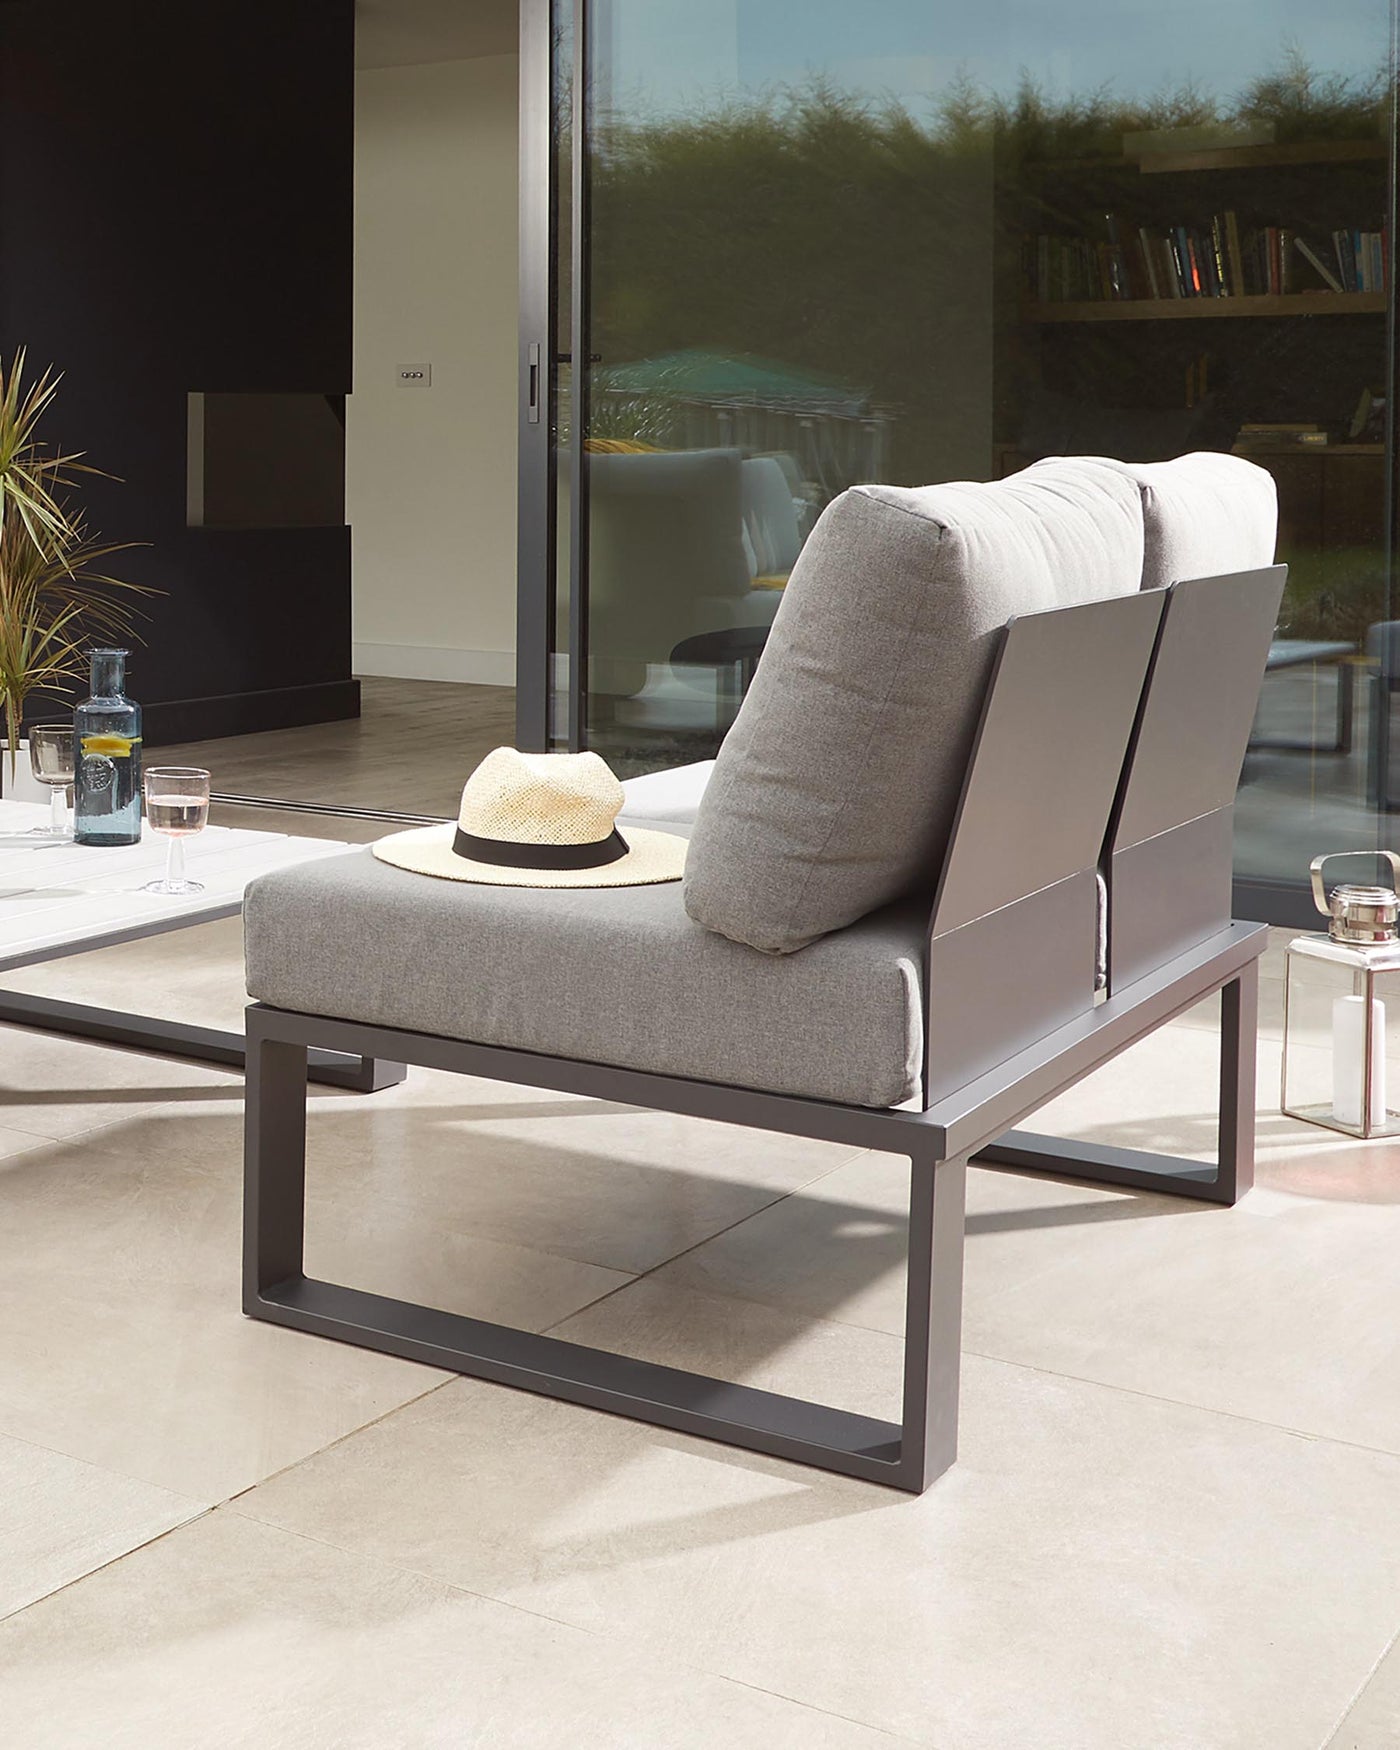 Modern outdoor chaise lounge with a minimalist metal frame in a dark finish and thick, plush cushions in a light grey fabric. The design features clean lines and a sleek, rectangular silhouette that complements a contemporary patio setting. A straw hat rests on the chaise, suggesting leisure and comfort.